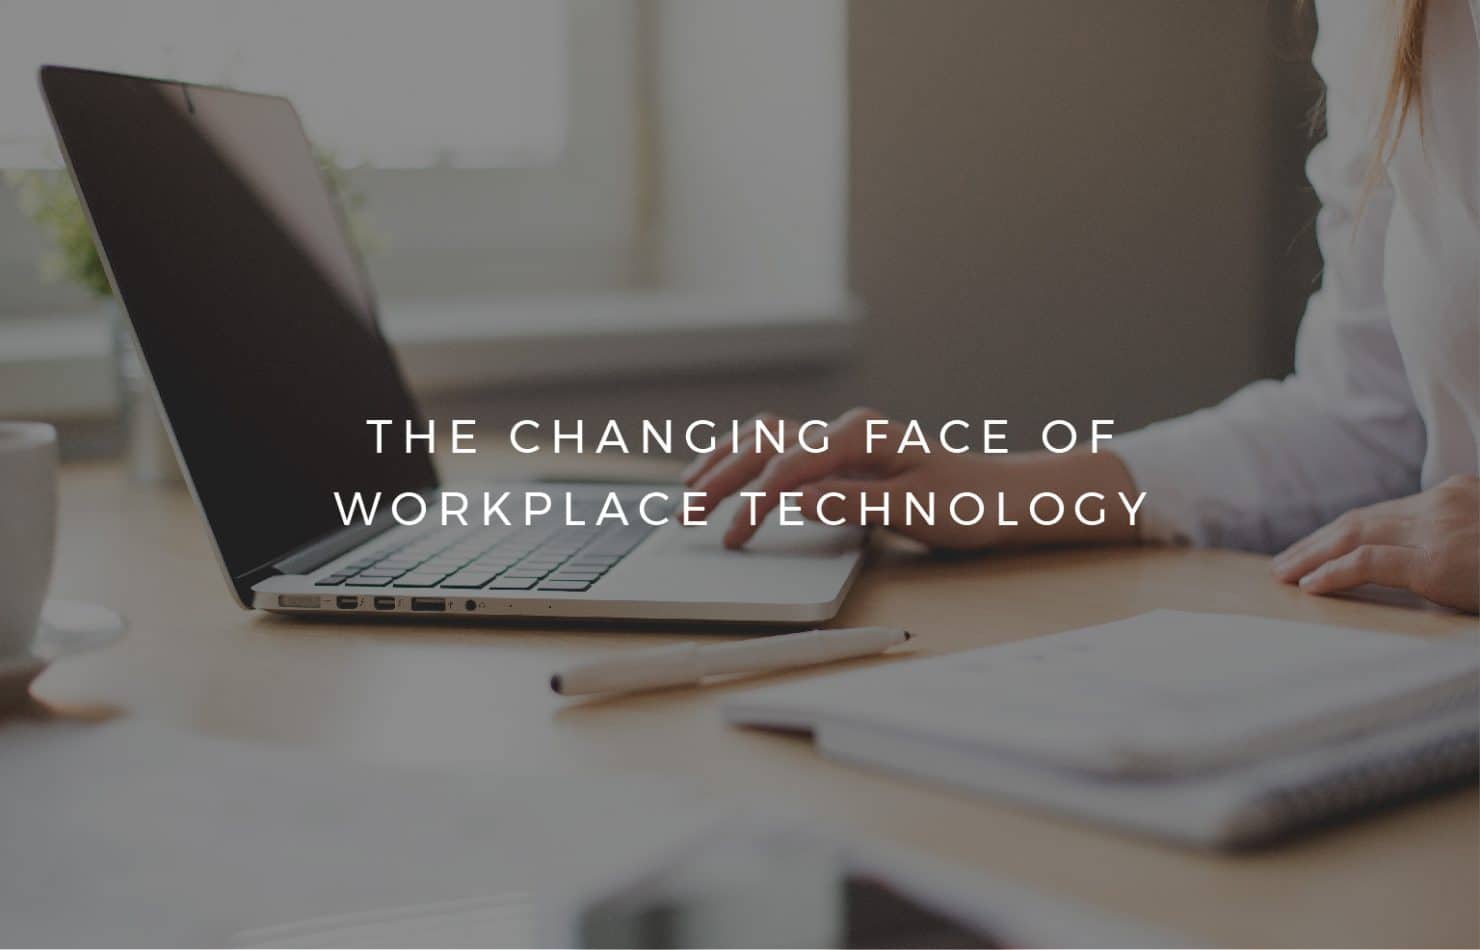 The changing face of workplace technology